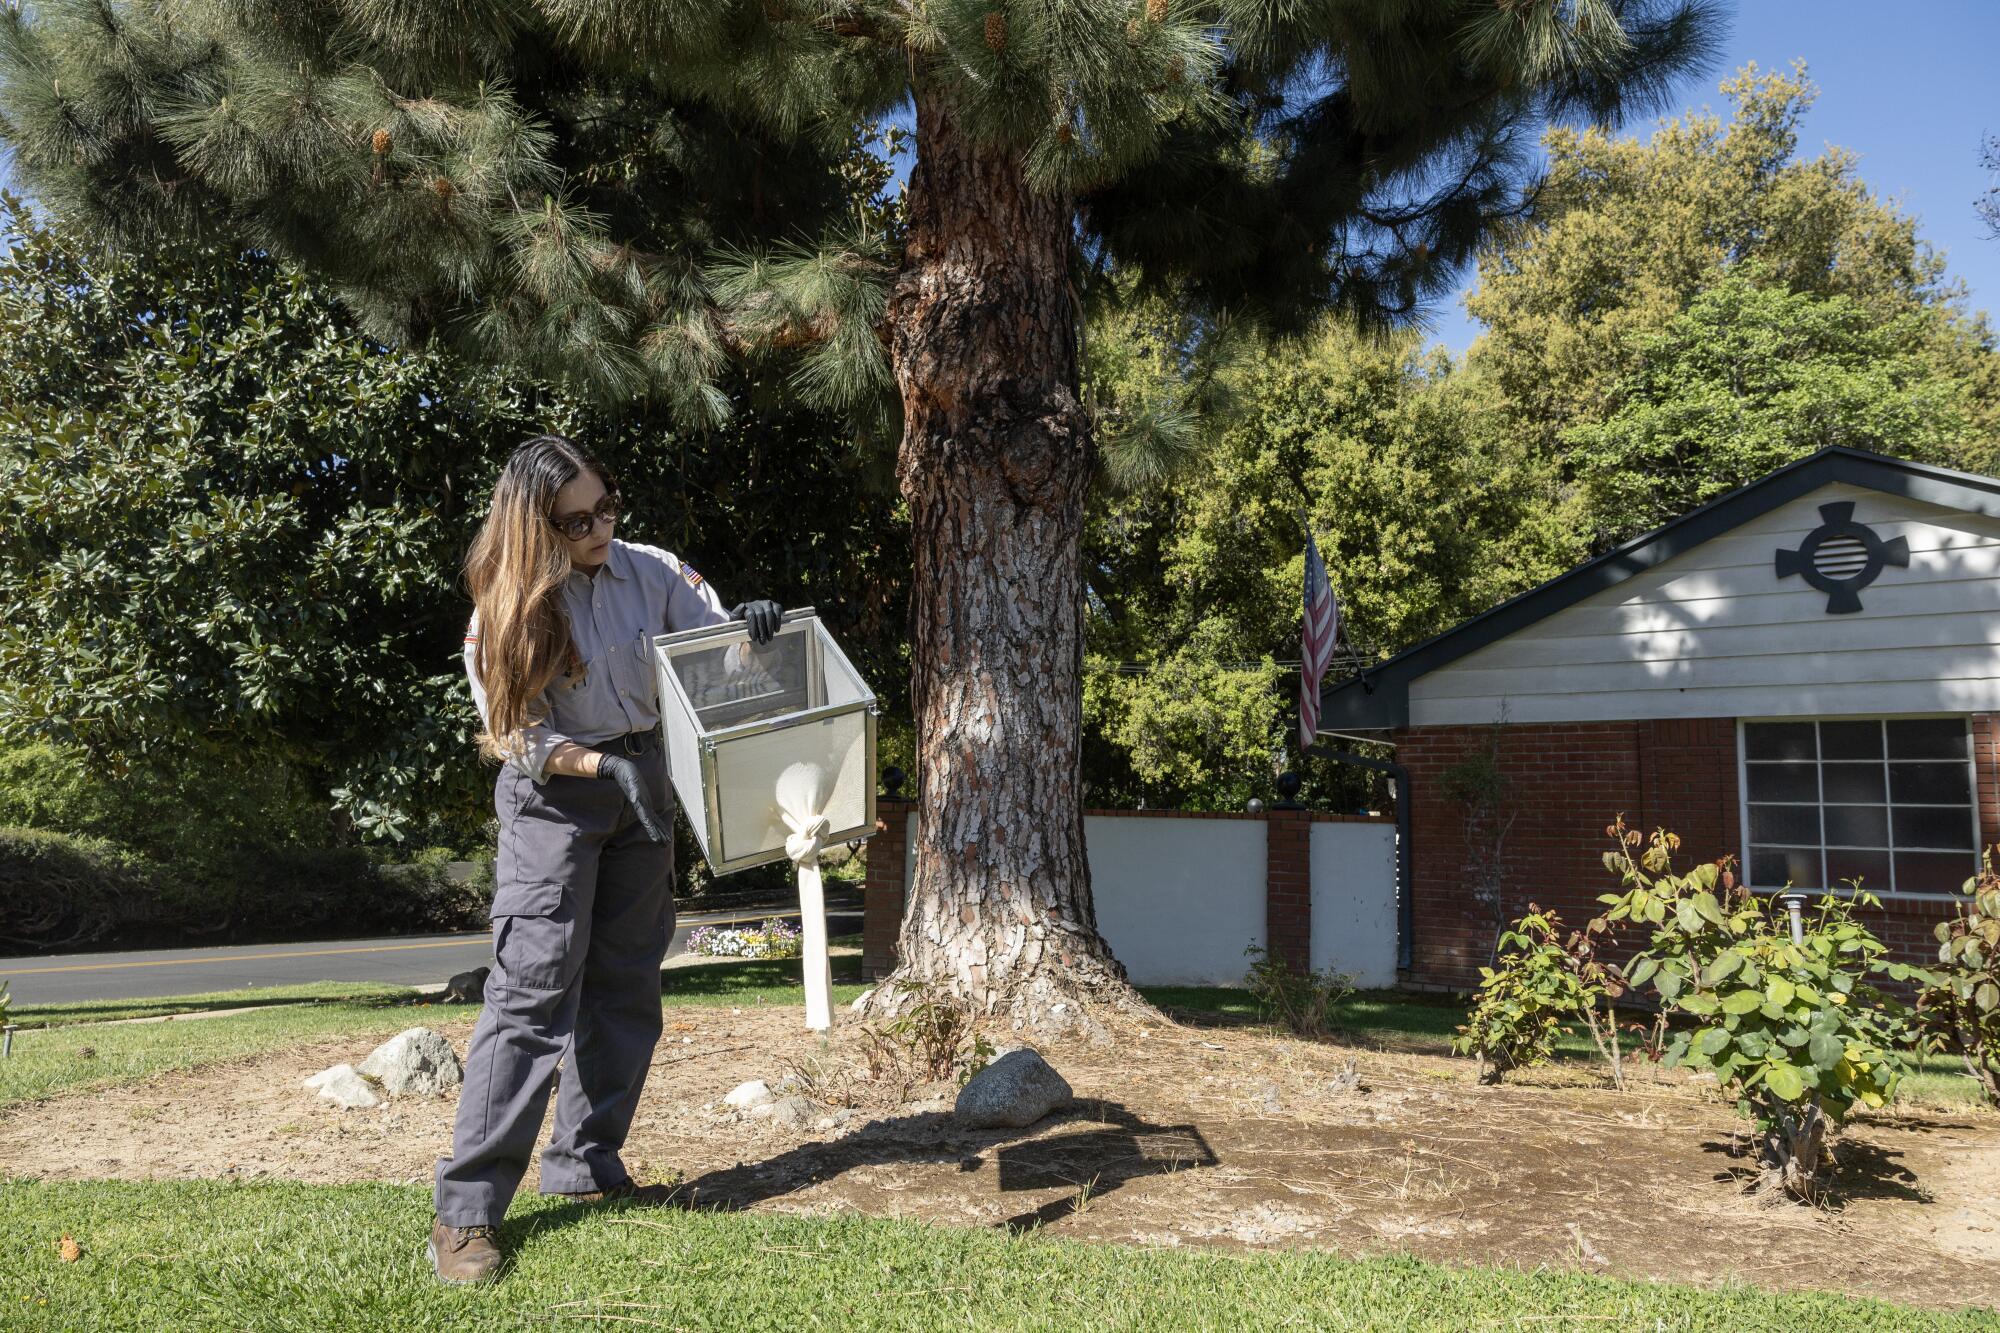 A woman stands under a tree in a residential area, releasing mosquitoes from a box.